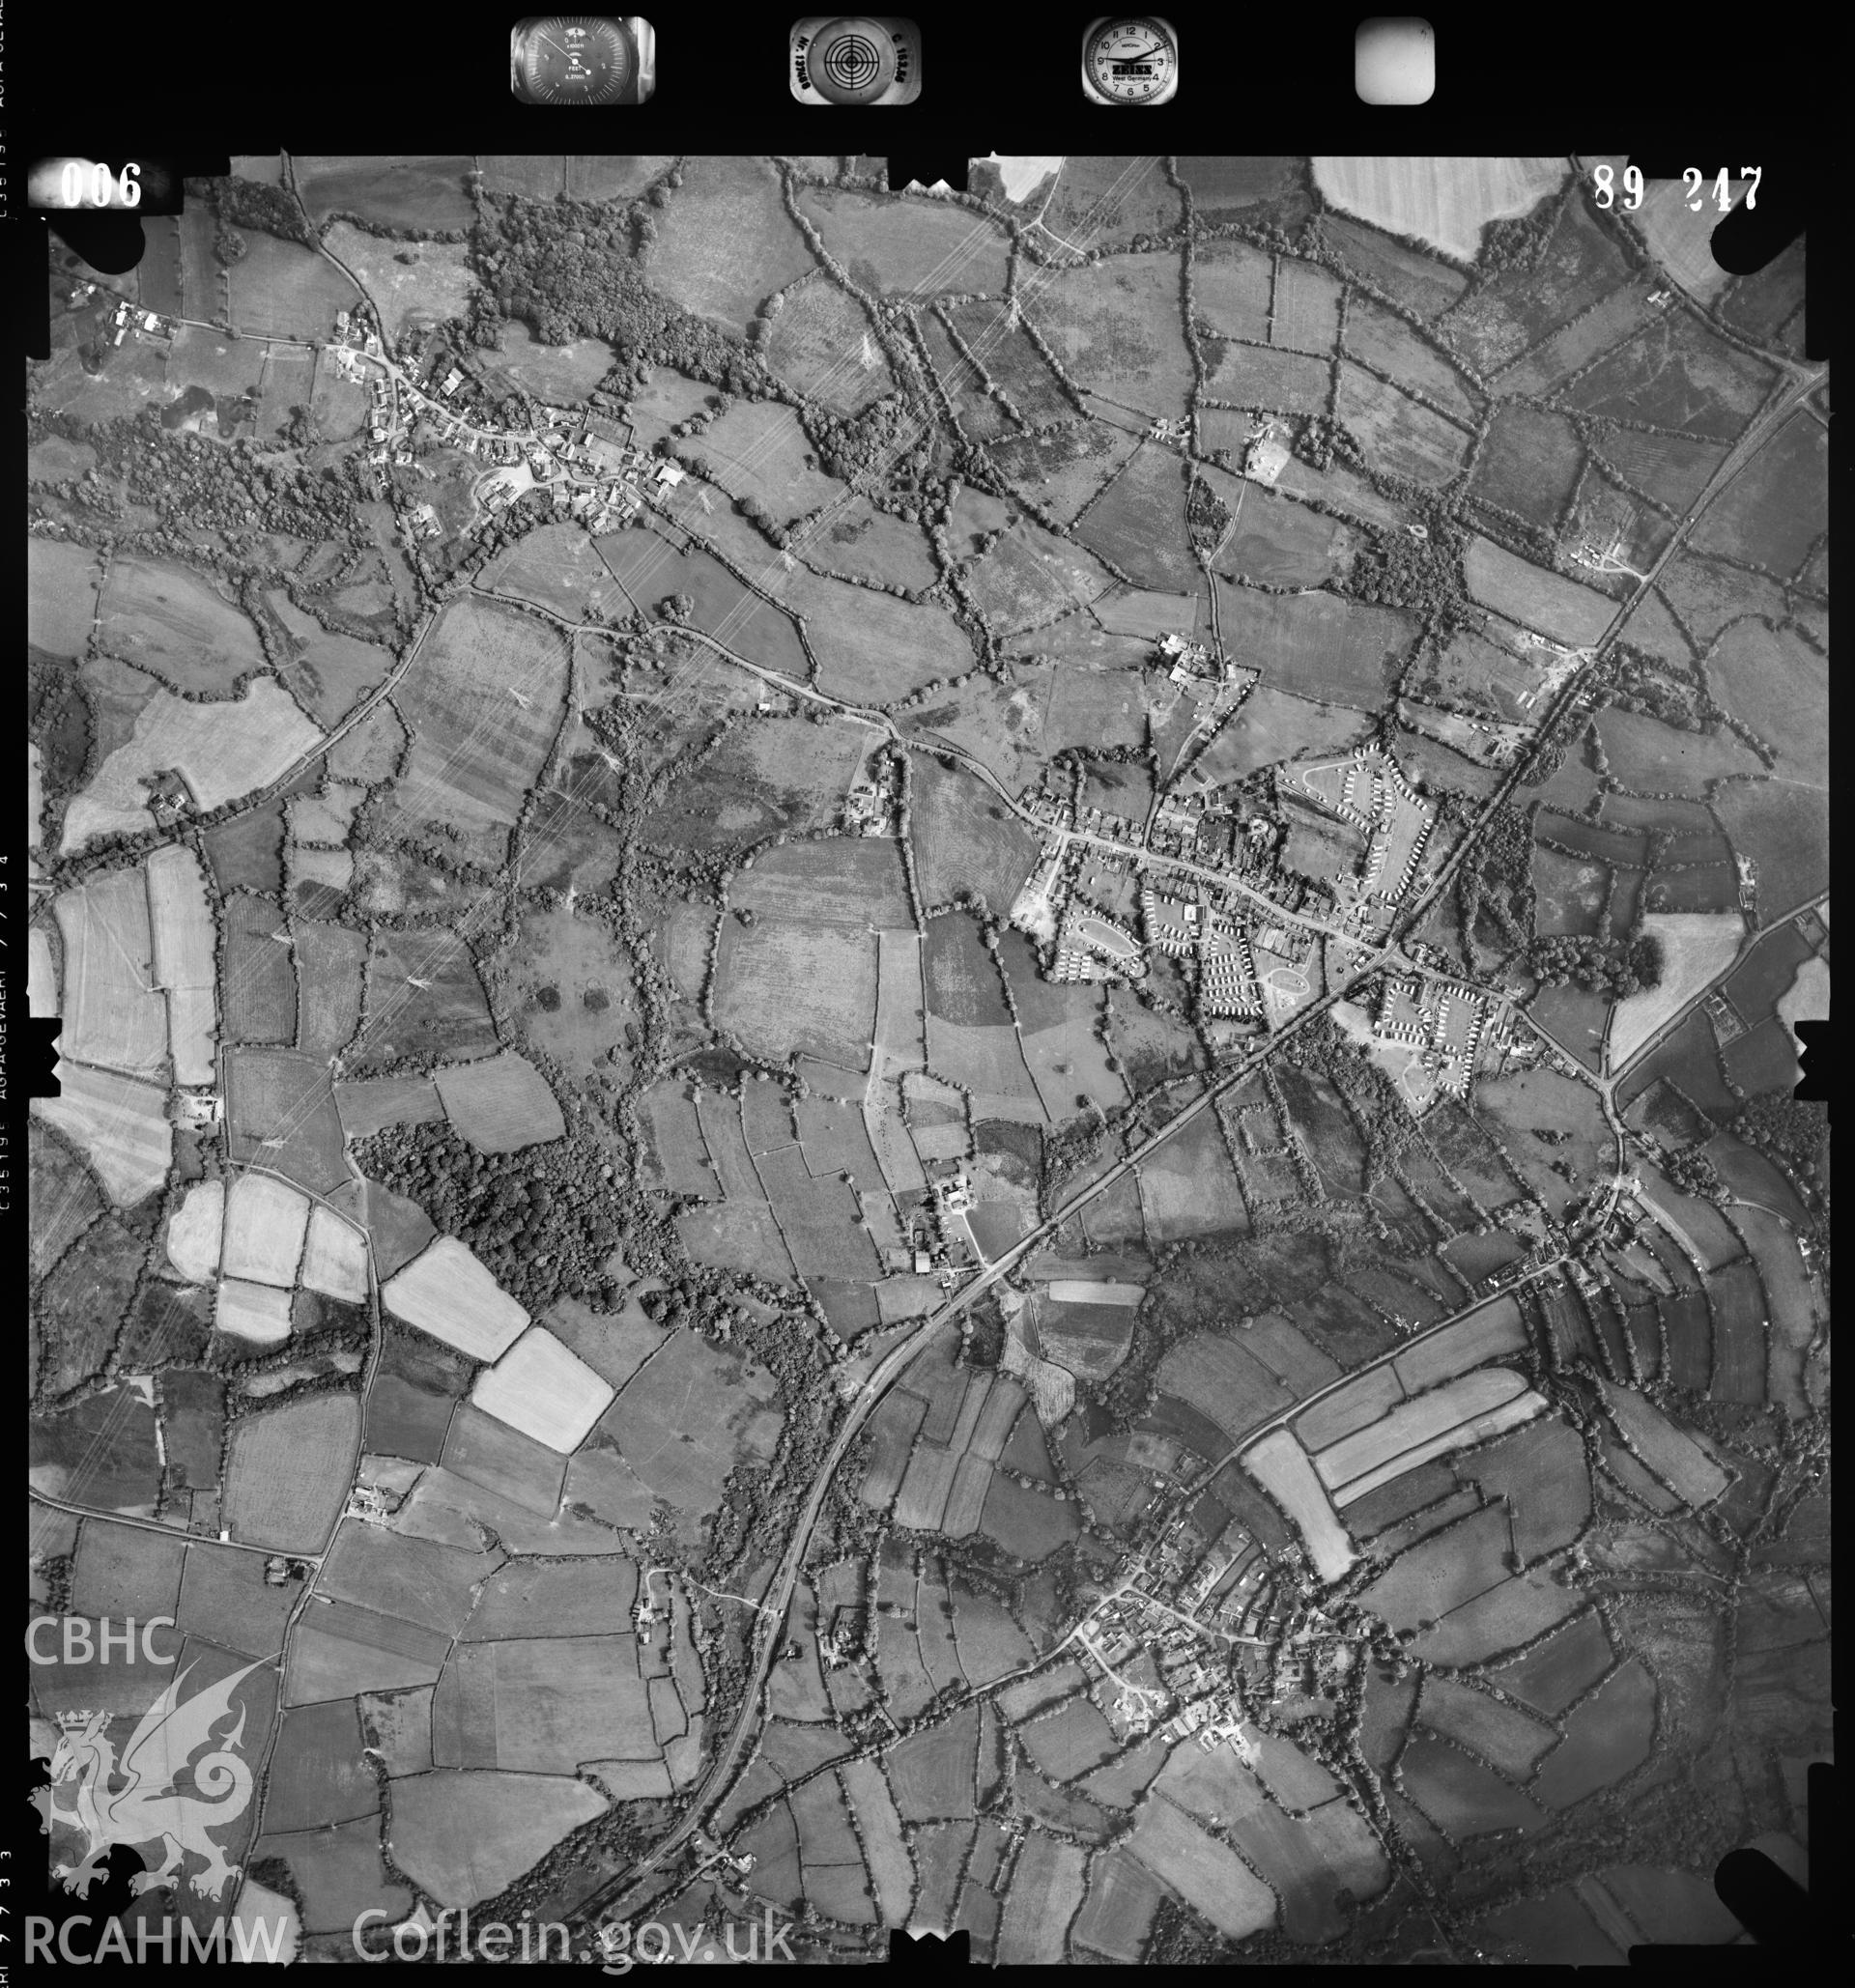 Digitized copy of an aerial photograph showing the Broadmoor area in Pembs  taken by Ordnance Survey, 1989.